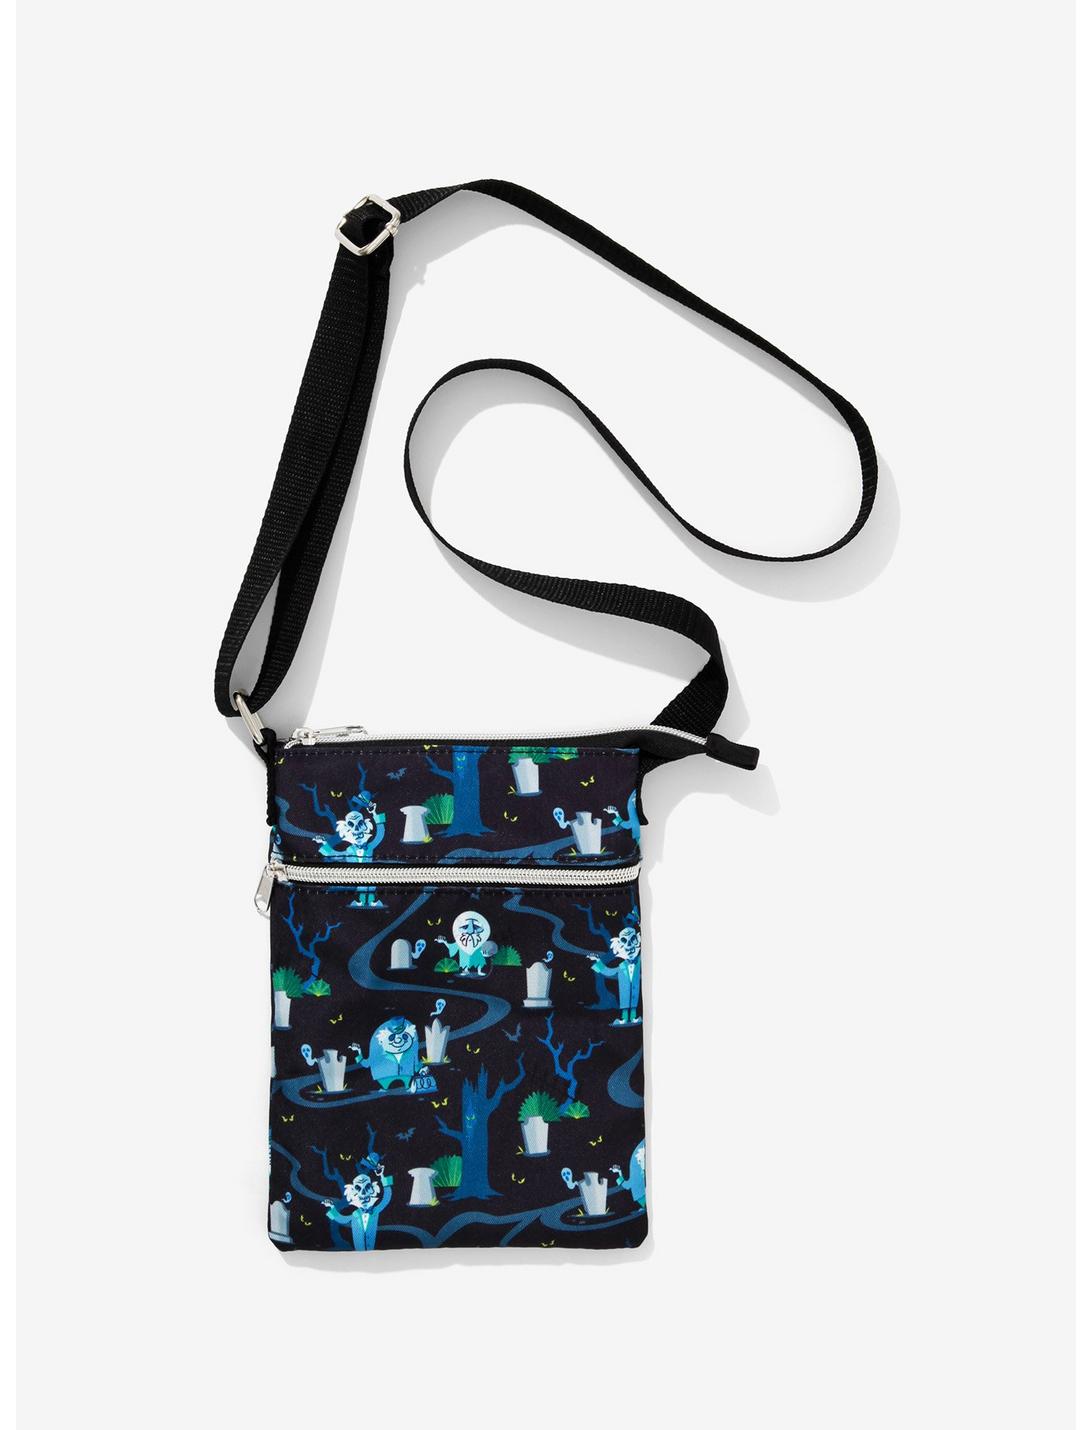 The Haunted Mansion Details about   Disney Parks Hitchhiking Ghosts Crossbody Bag by Loungefly 